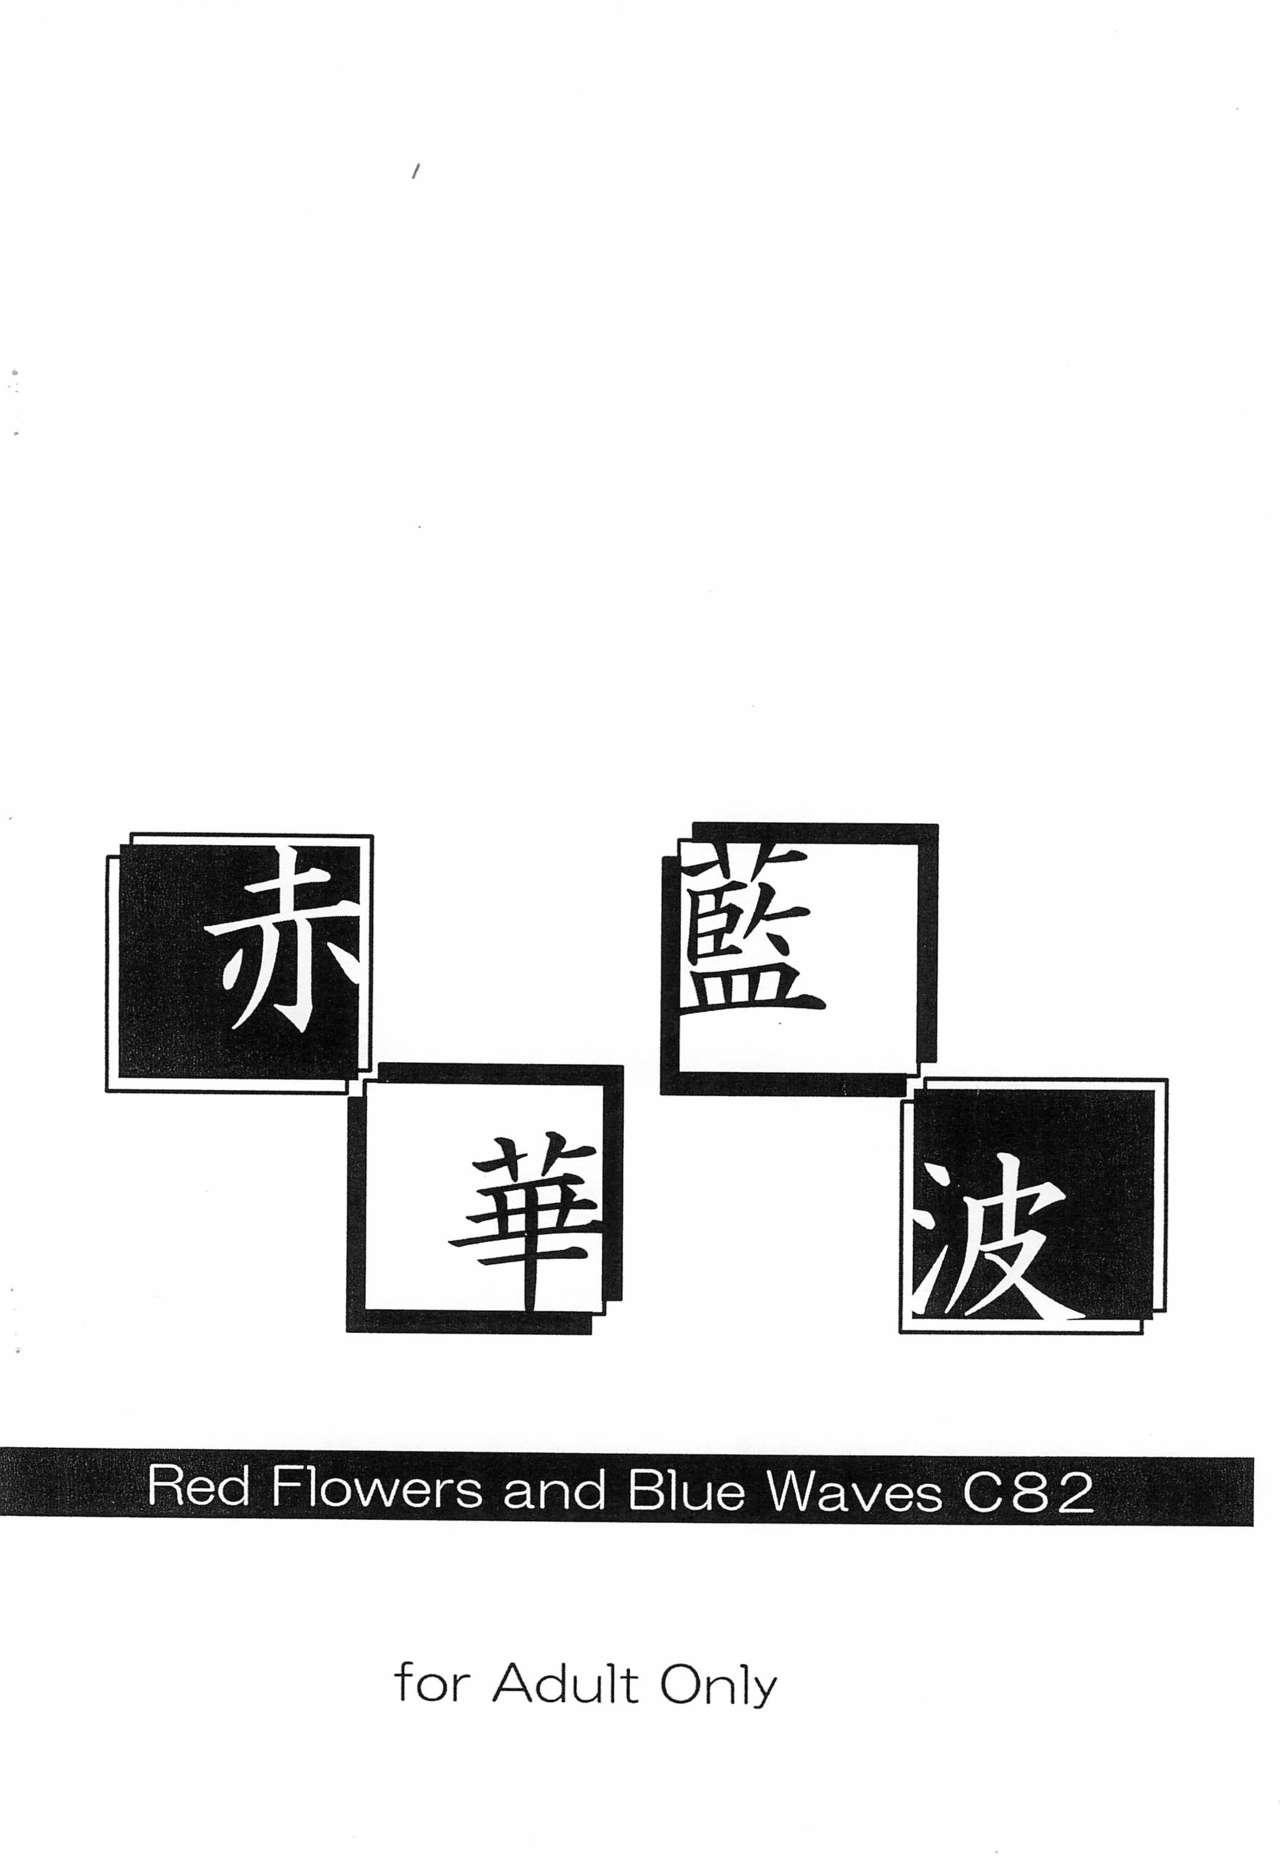 Pinoy Red Flowers and Blue Waves - Original 18 Year Old Porn - Page 14